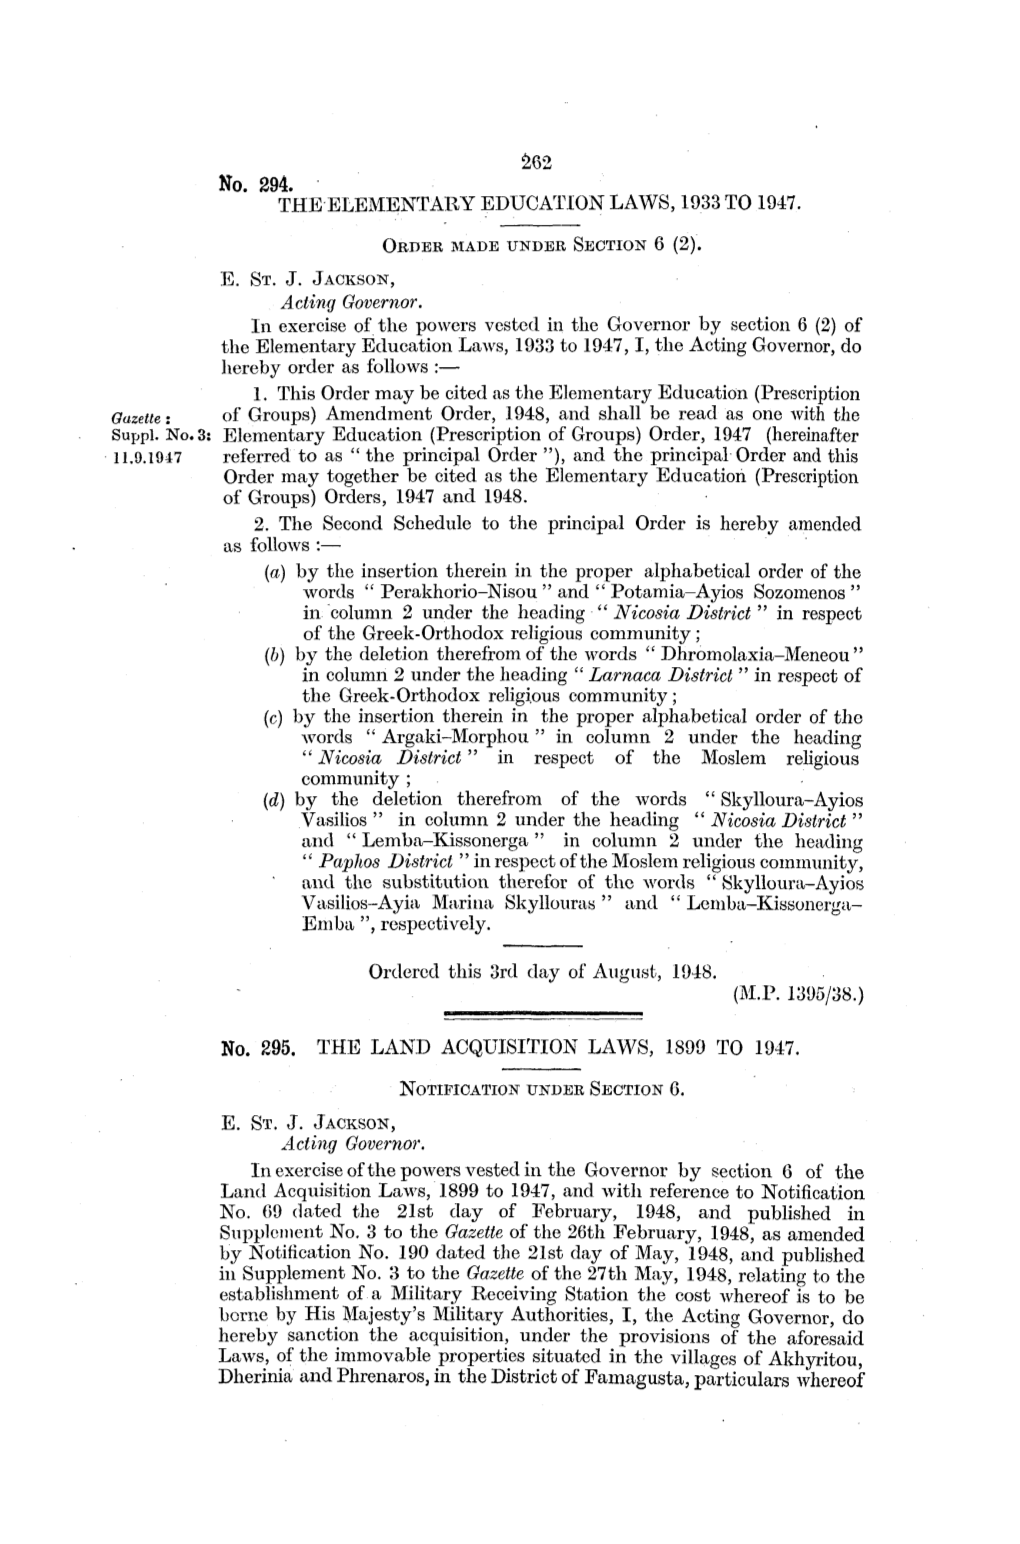 No. 294. the ELEMENTARY EDUCATION LAWS, 1933 to 1947